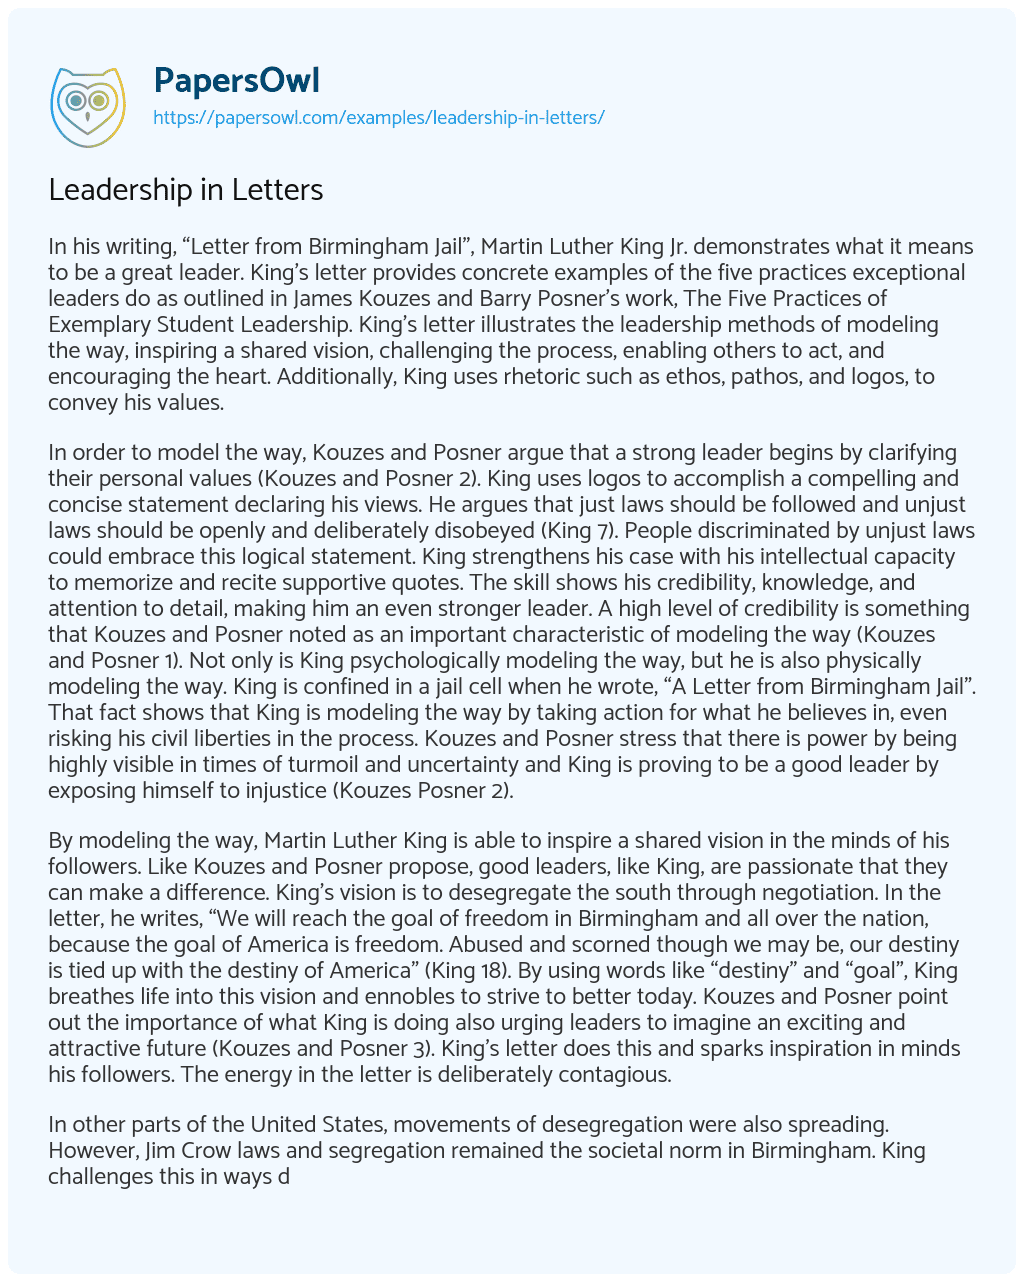 Essay on Leadership in Letters